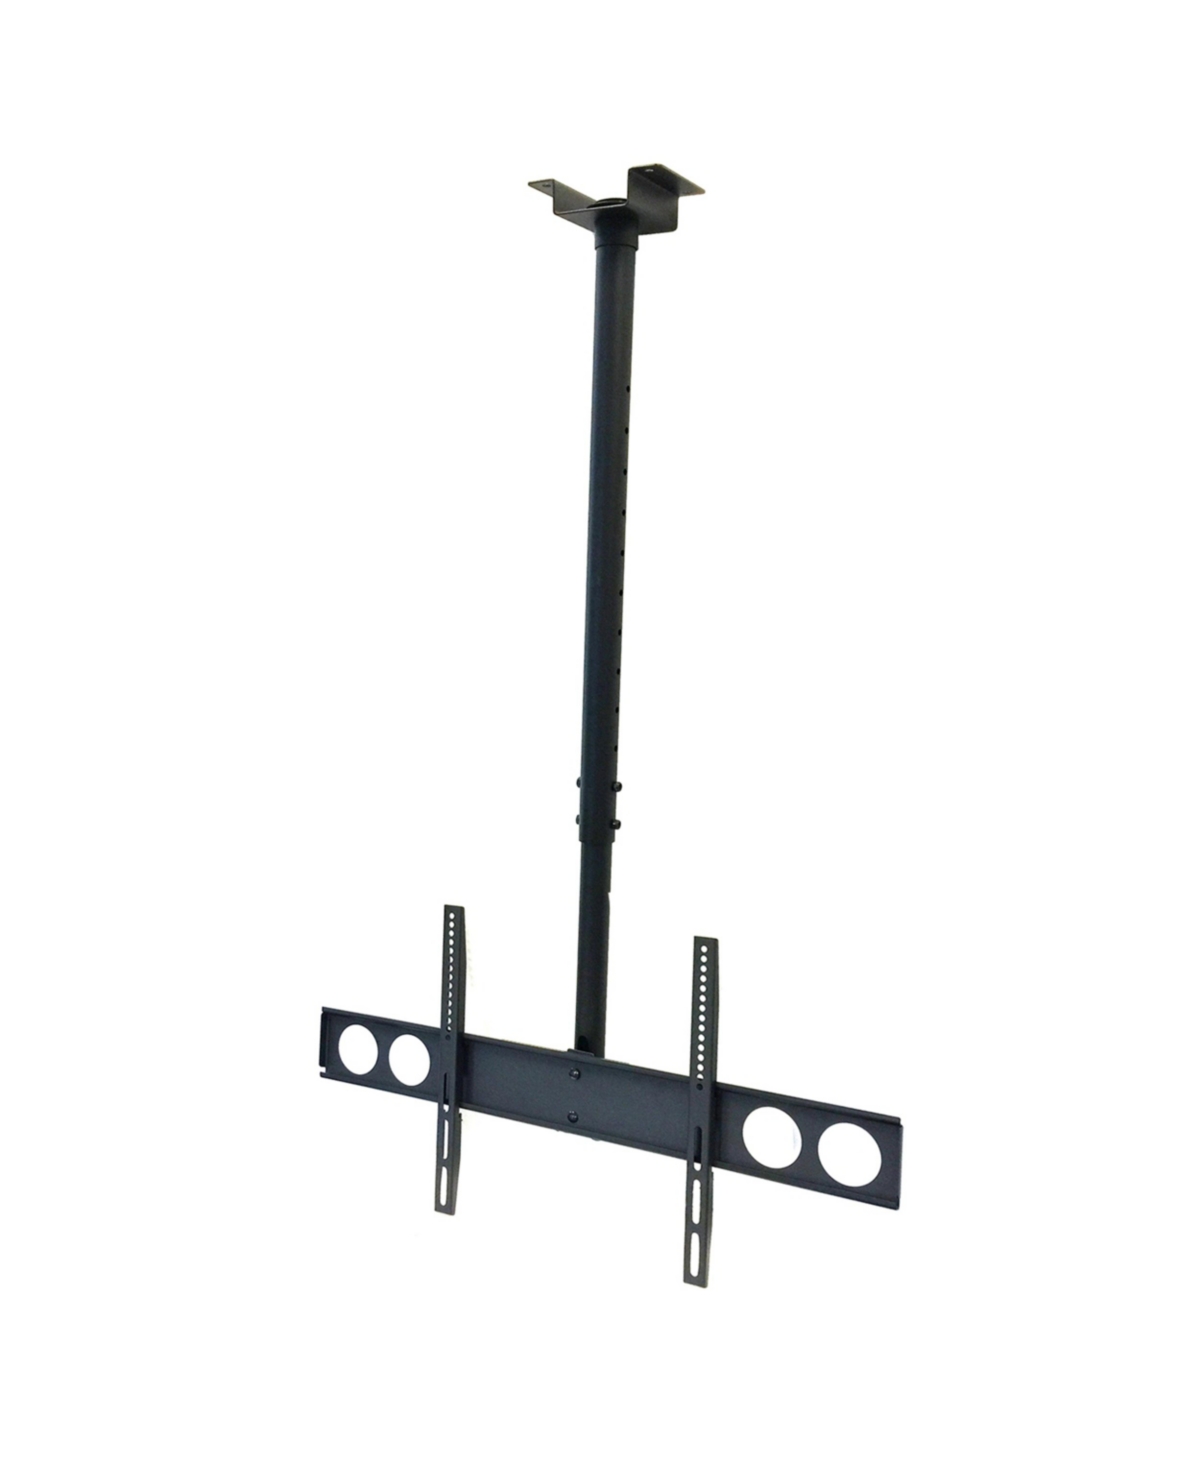 Heavy Duty Tilting Ceiling Television Mount for 37" - 70" Lcd, Led and Plasma Televisions - Black